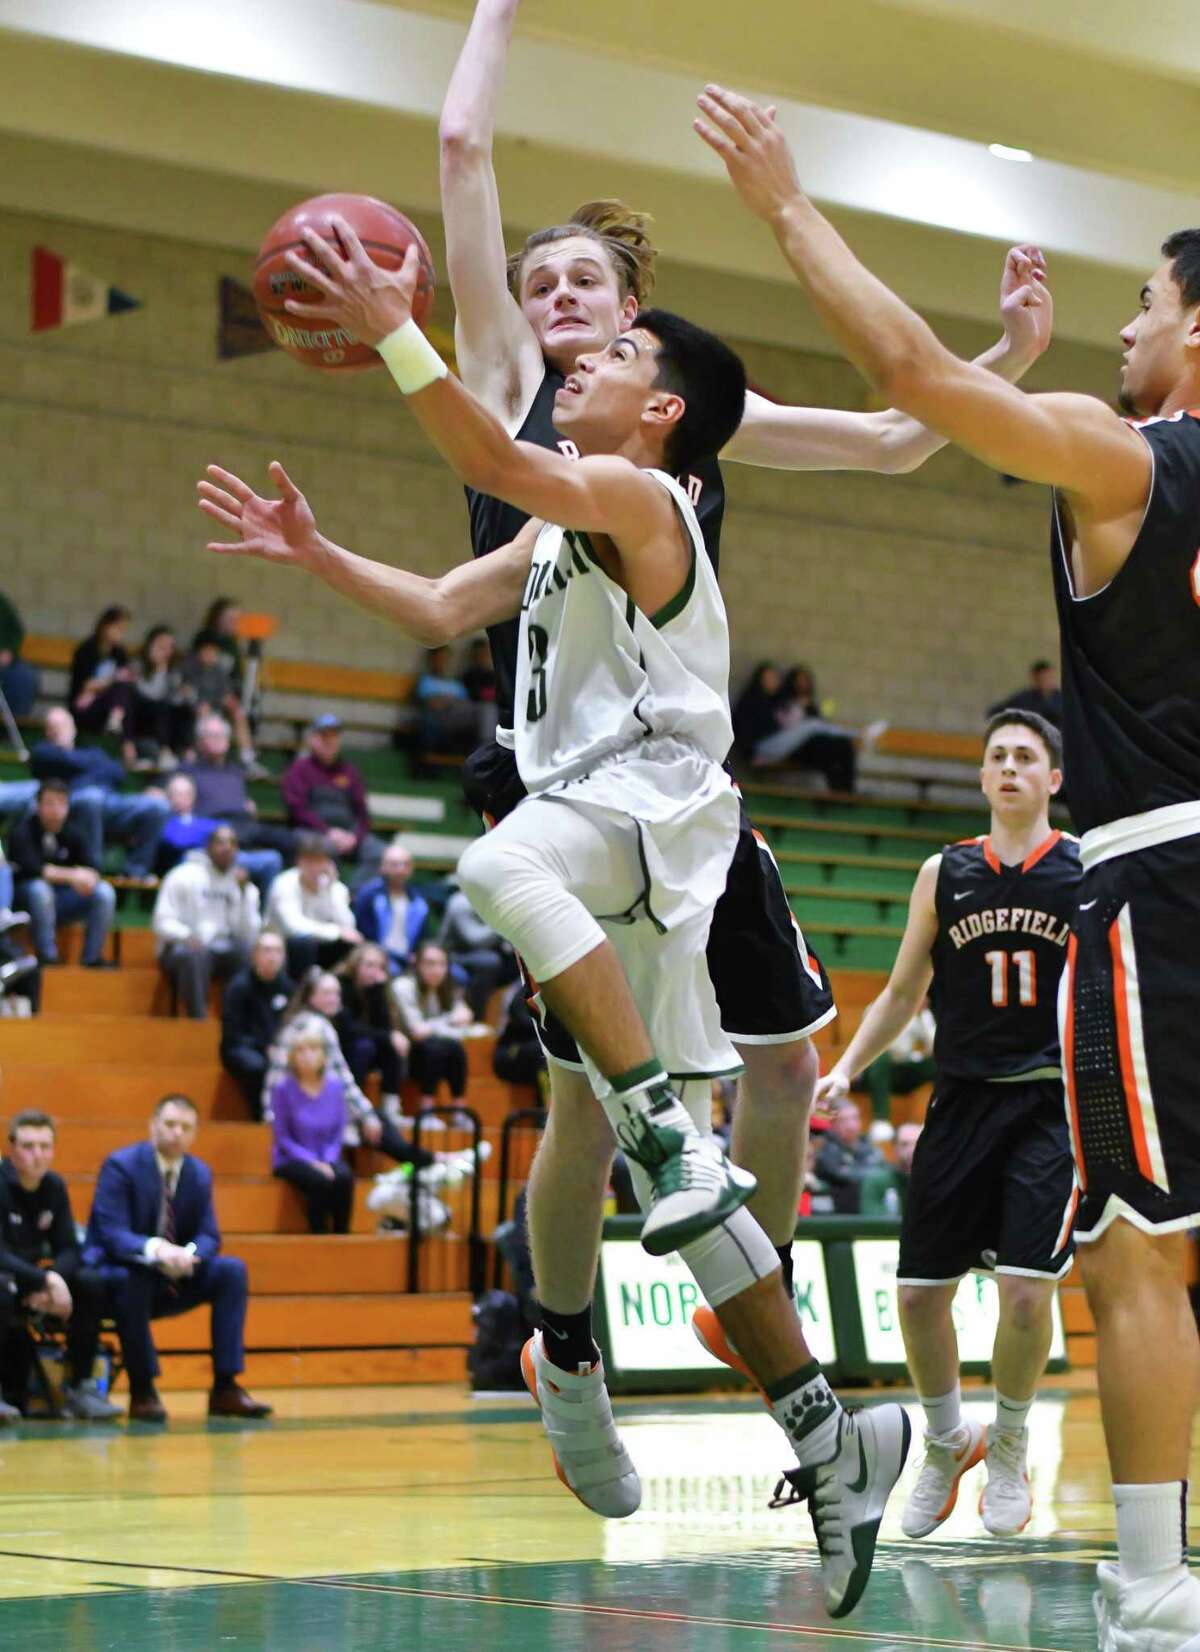 Norwalk’s Izaiah Lopez drives to the basket during Thursday’s game against Ridgefield at Norwalk High School.